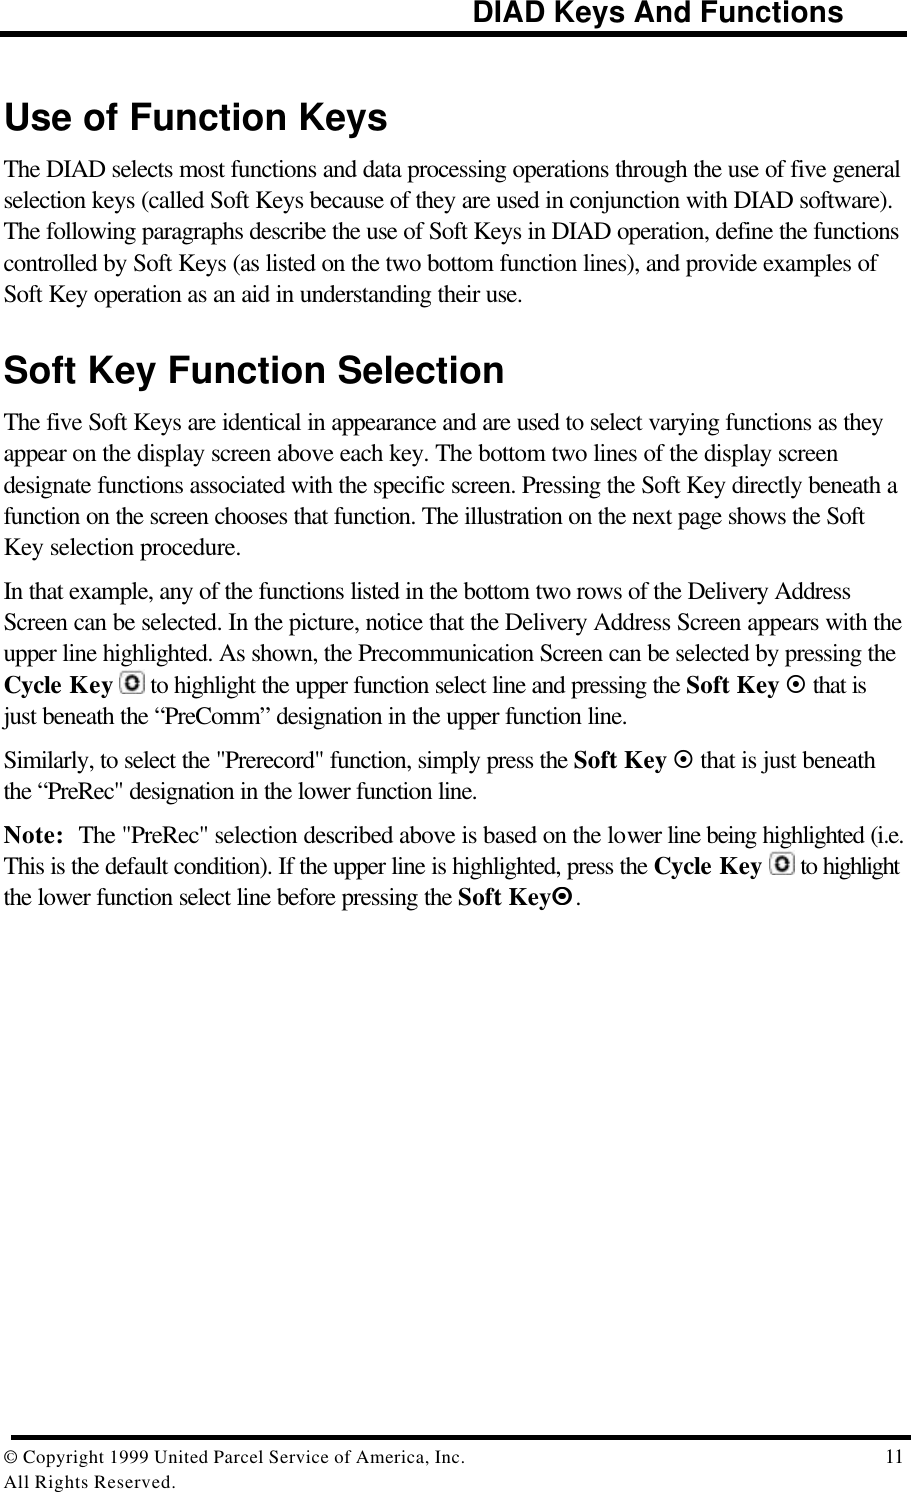                                                             DIAD Keys And Functions© Copyright 1999 United Parcel Service of America, Inc.  11All Rights Reserved.Use of Function KeysThe DIAD selects most functions and data processing operations through the use of five generalselection keys (called Soft Keys because of they are used in conjunction with DIAD software).The following paragraphs describe the use of Soft Keys in DIAD operation, define the functionscontrolled by Soft Keys (as listed on the two bottom function lines), and provide examples ofSoft Key operation as an aid in understanding their use.Soft Key Function SelectionThe five Soft Keys are identical in appearance and are used to select varying functions as theyappear on the display screen above each key. The bottom two lines of the display screendesignate functions associated with the specific screen. Pressing the Soft Key directly beneath afunction on the screen chooses that function. The illustration on the next page shows the SoftKey selection procedure.In that example, any of the functions listed in the bottom two rows of the Delivery AddressScreen can be selected. In the picture, notice that the Delivery Address Screen appears with theupper line highlighted. As shown, the Precommunication Screen can be selected by pressing theCycle Key  to highlight the upper function select line and pressing the Soft Key ¤ that isjust beneath the “PreComm” designation in the upper function line.Similarly, to select the &quot;Prerecord&quot; function, simply press the Soft Key ¤ that is just beneaththe “PreRec&quot; designation in the lower function line.Note: The &quot;PreRec&quot; selection described above is based on the lower line being highlighted (i.e.This is the default condition). If the upper line is highlighted, press the Cycle Key   to highlightthe lower function select line before pressing the Soft Key¤¤.